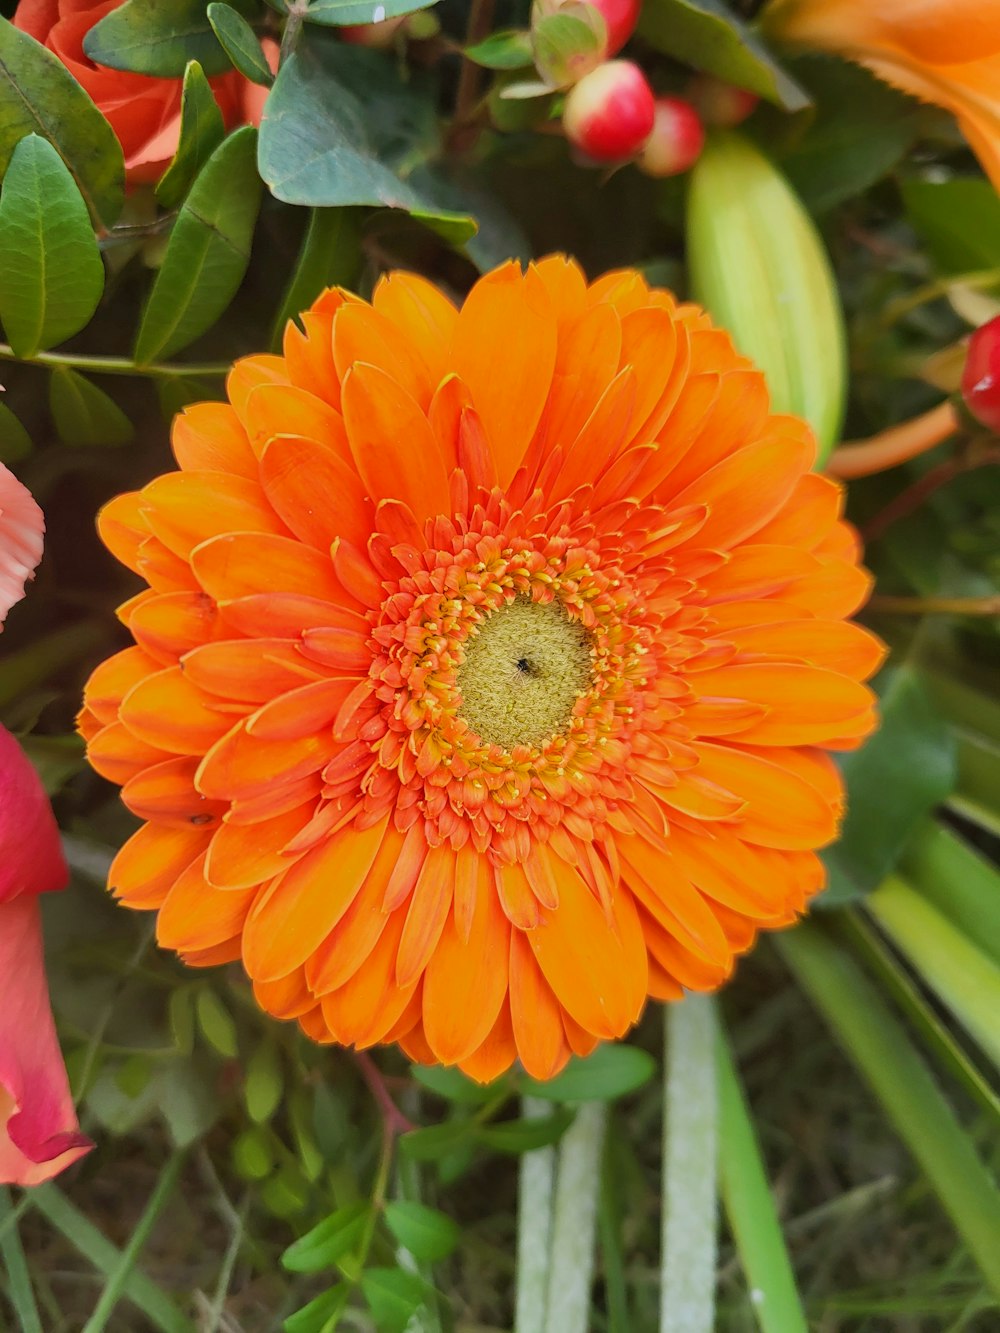 a close up of an orange flower surrounded by other flowers